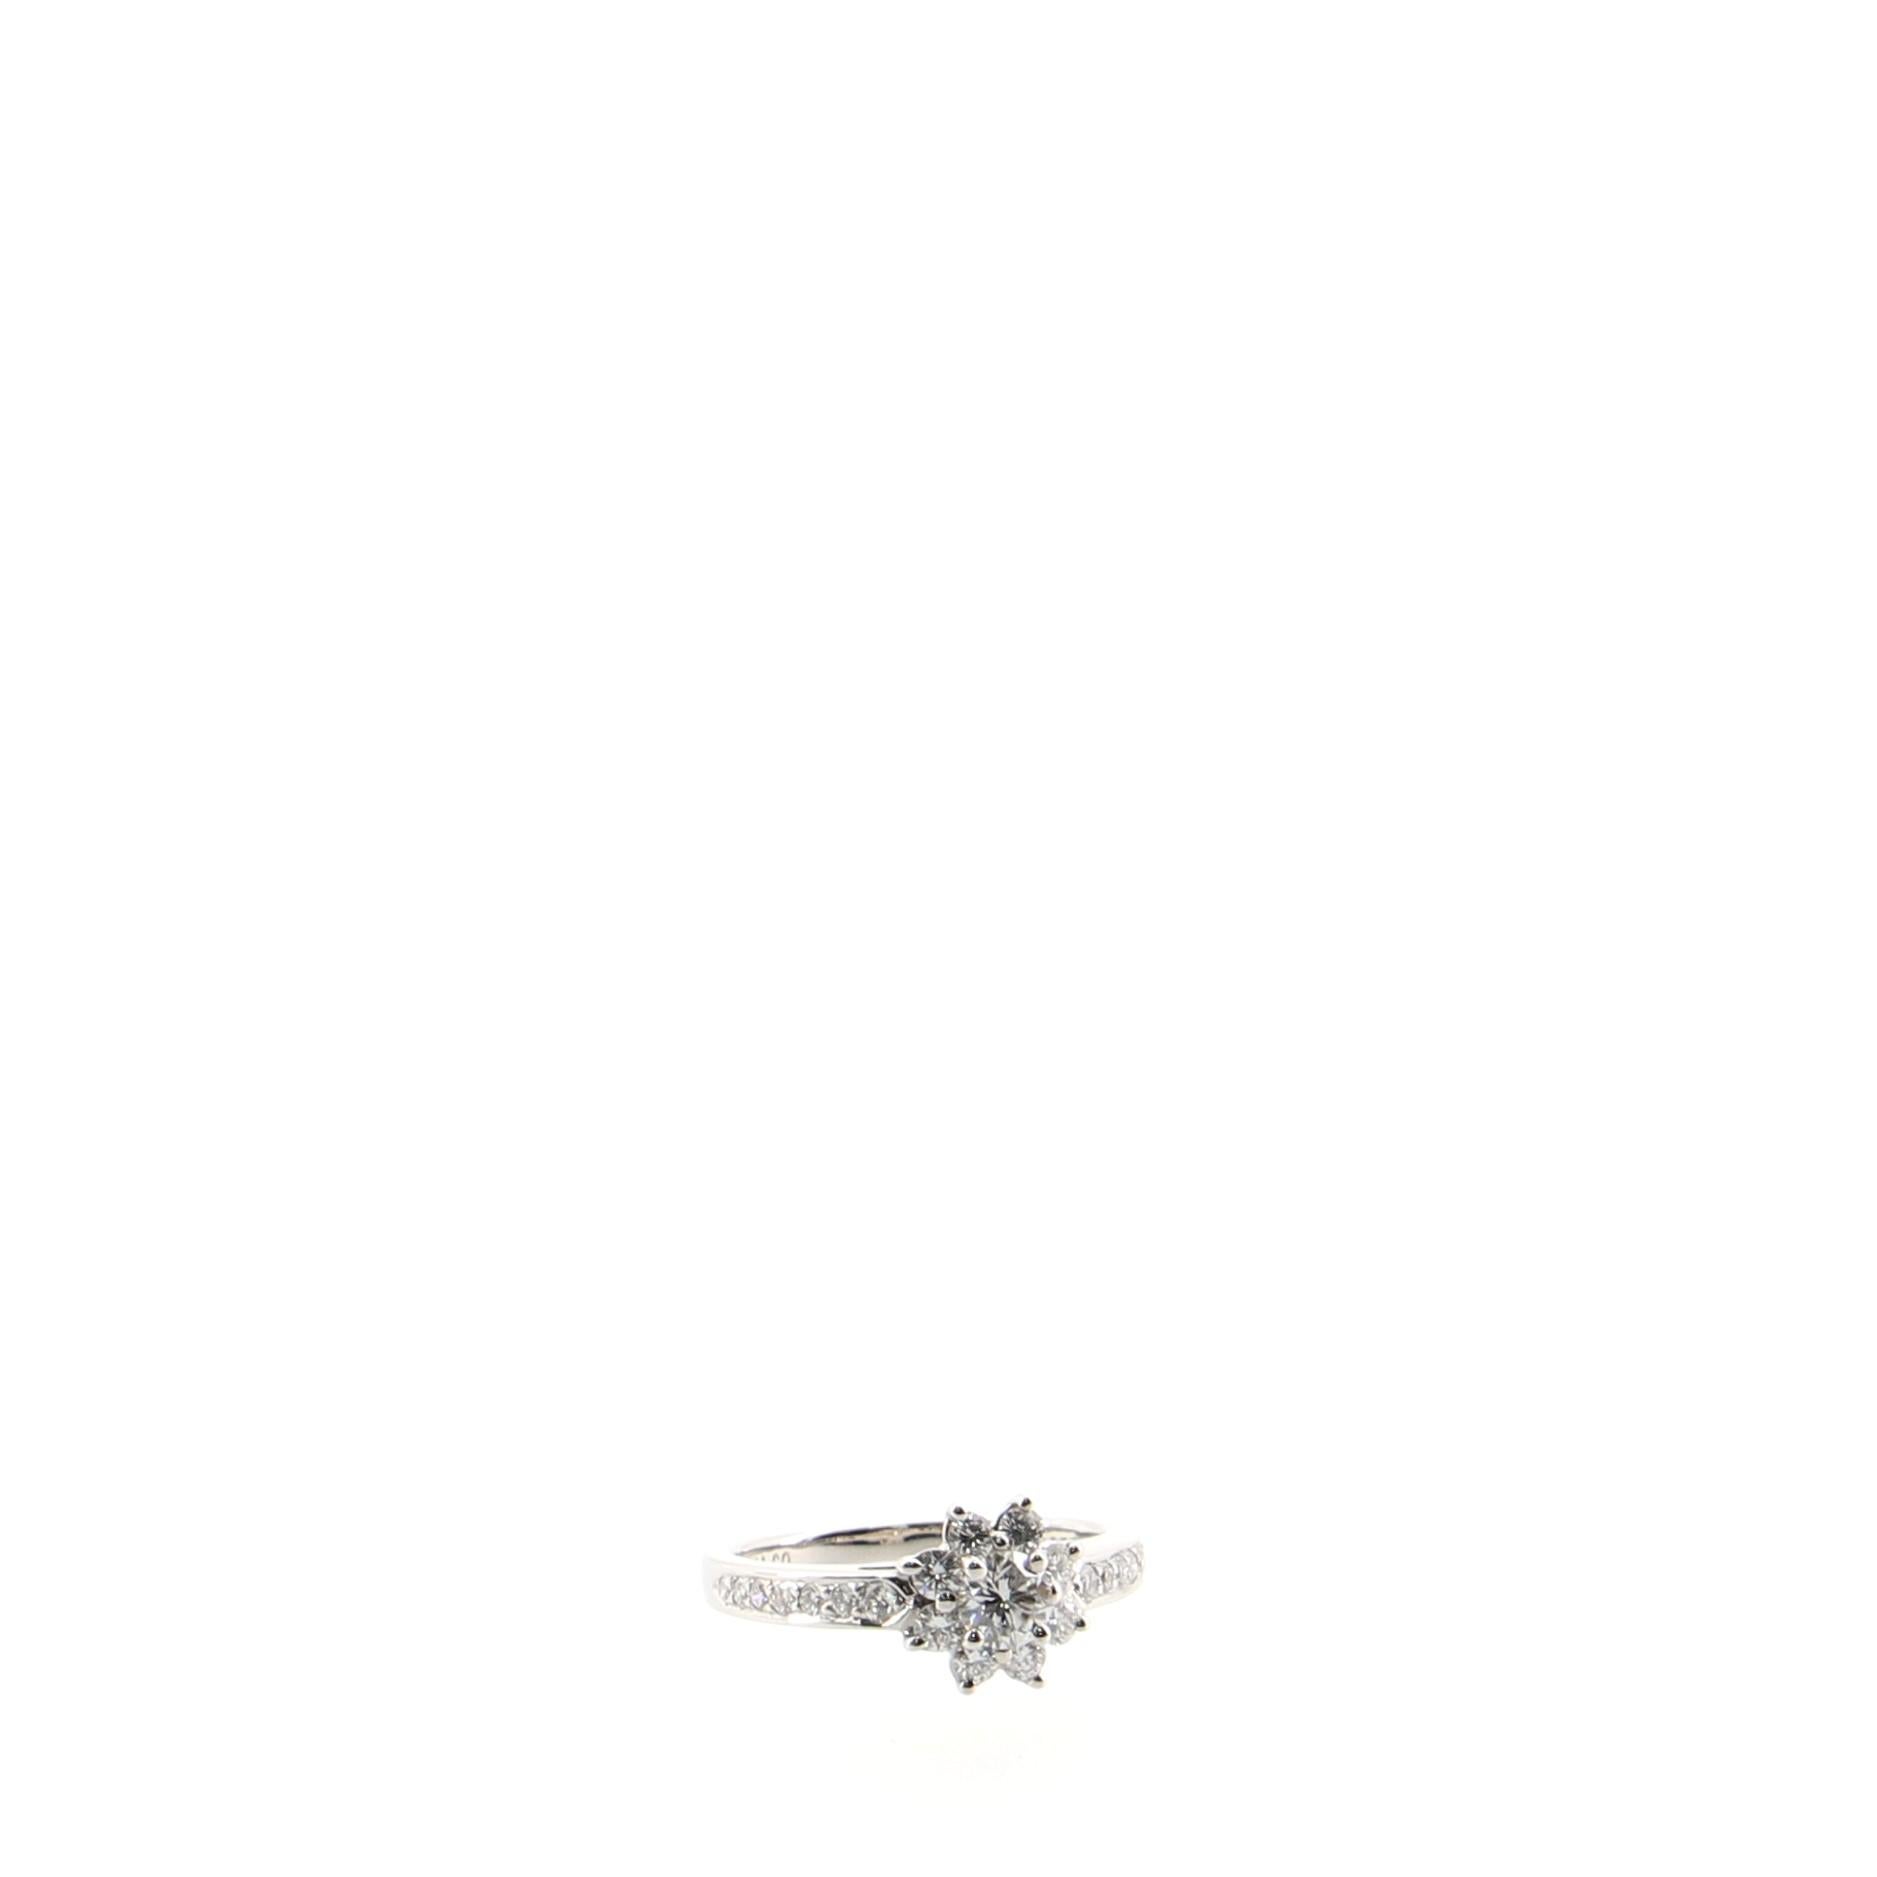 Condition: Great. Shows signs of minor wear.
Accessories: No Accessories
Measurements: Size: 4.5 - 48, Width: 2.5 mm
Designer: Tiffany & Co.
Model: Flora Ring Platinum and Diamonds
Exterior Material: Platinum, Diamond
Exterior Color: Silver
Item